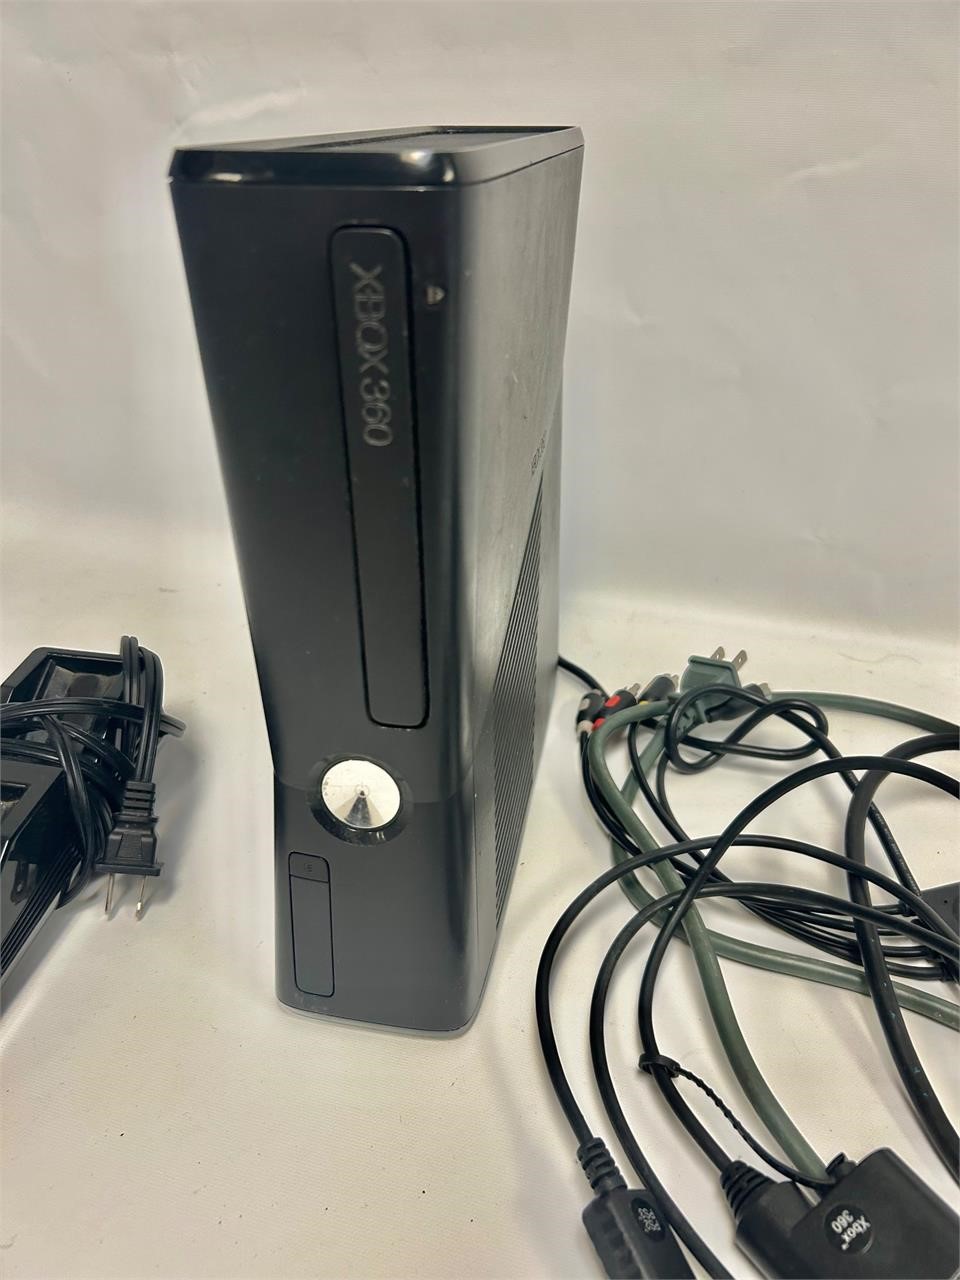 Xbox 360 console. With power cords.